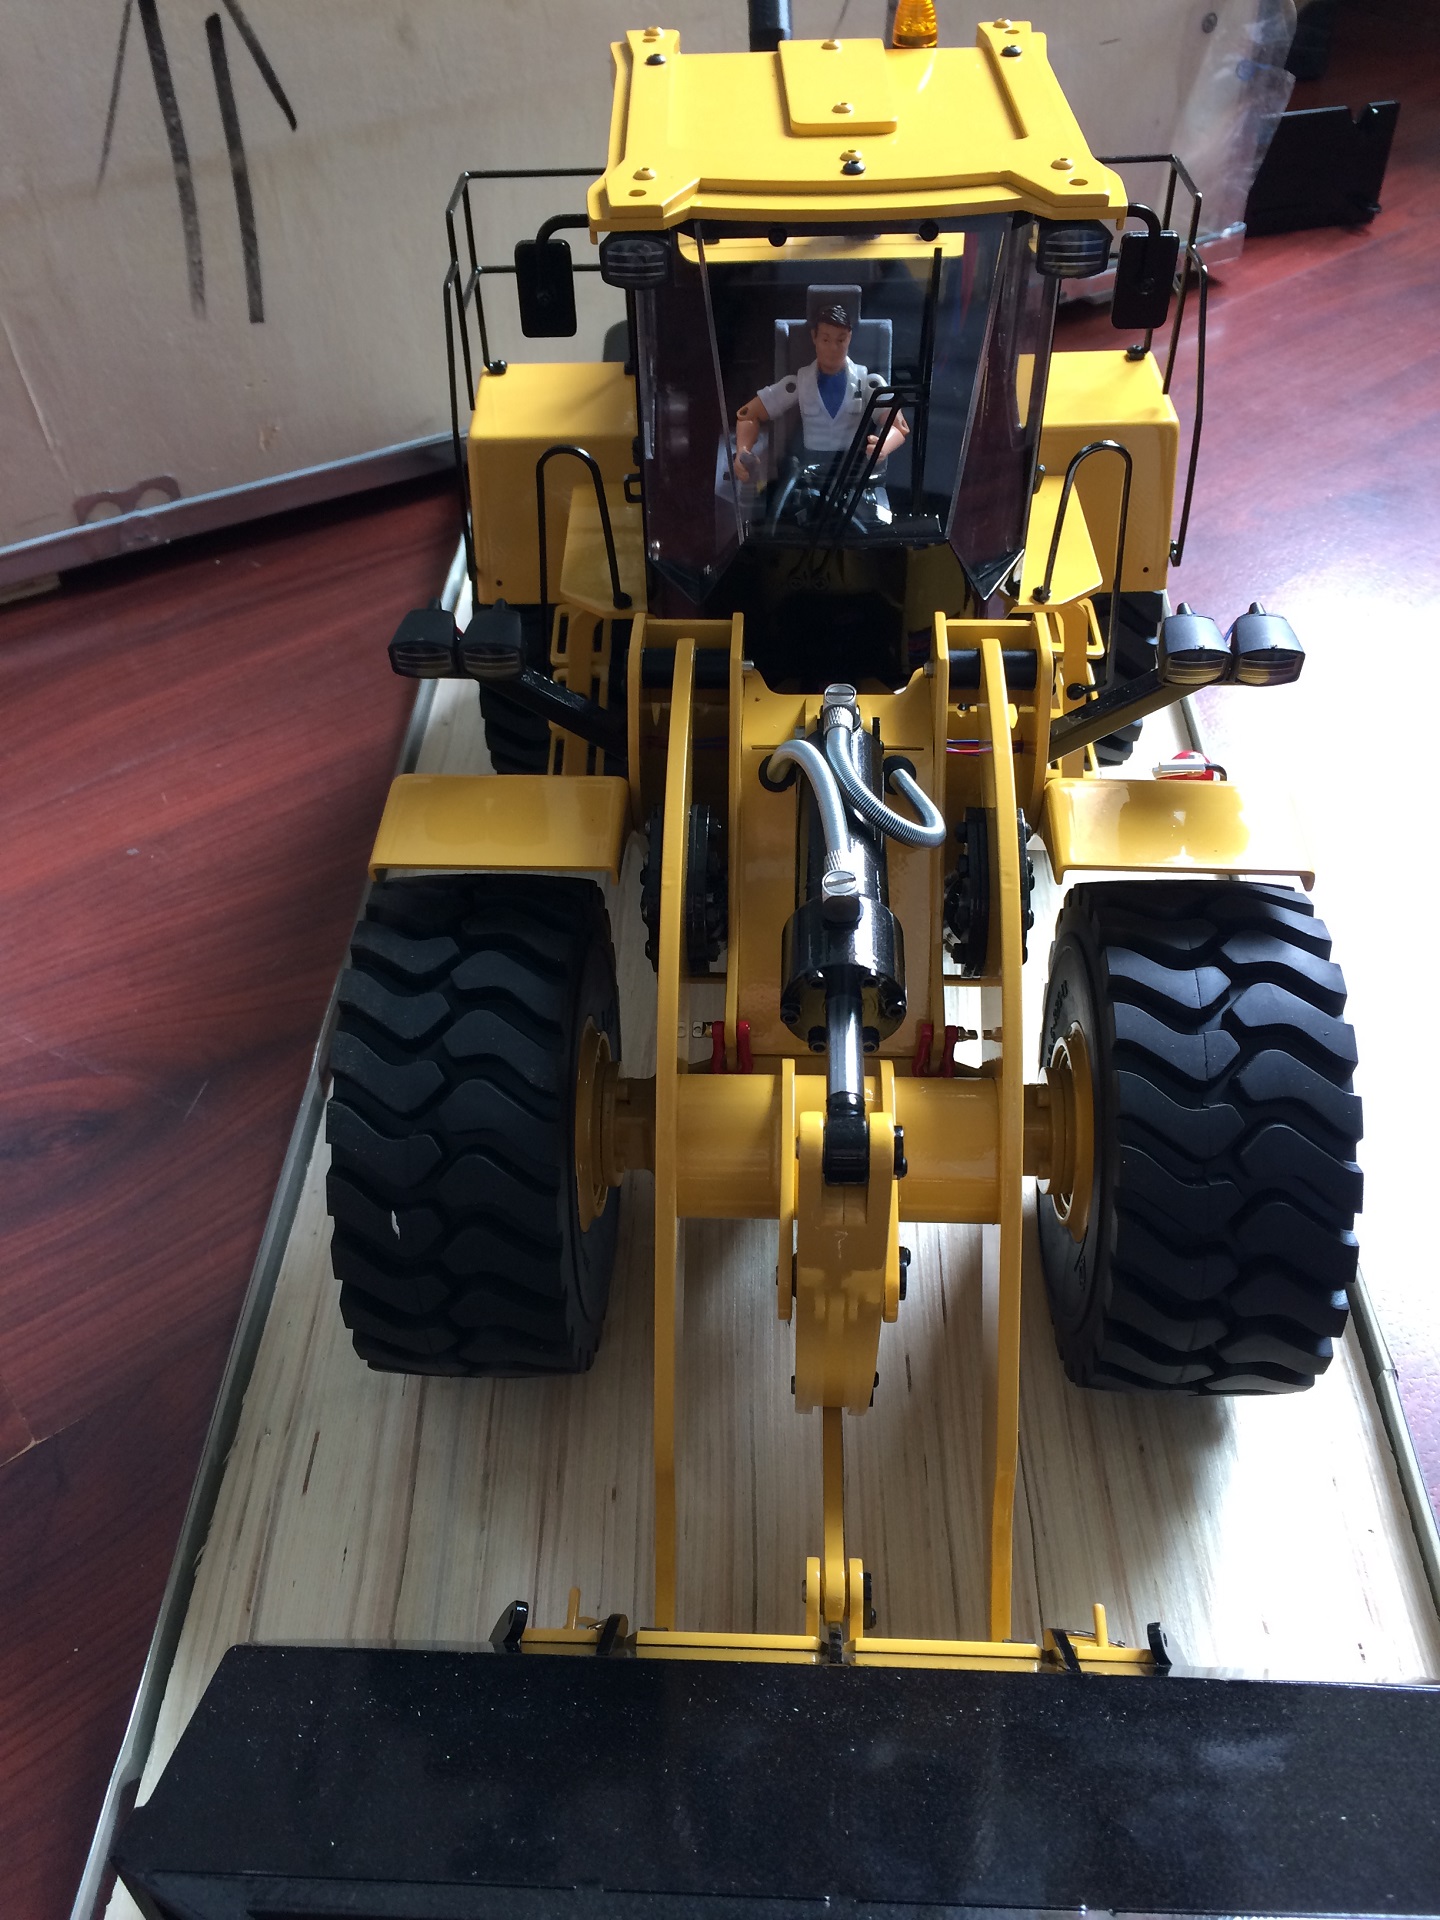 1/14 Metal Hydraulic RC Wheel Loader, Remote Control All-Metal High Quality Like Real Wheel Loader, Professional Hobbyist Models Not Toys, Large Heavy RC Construction Vehicles